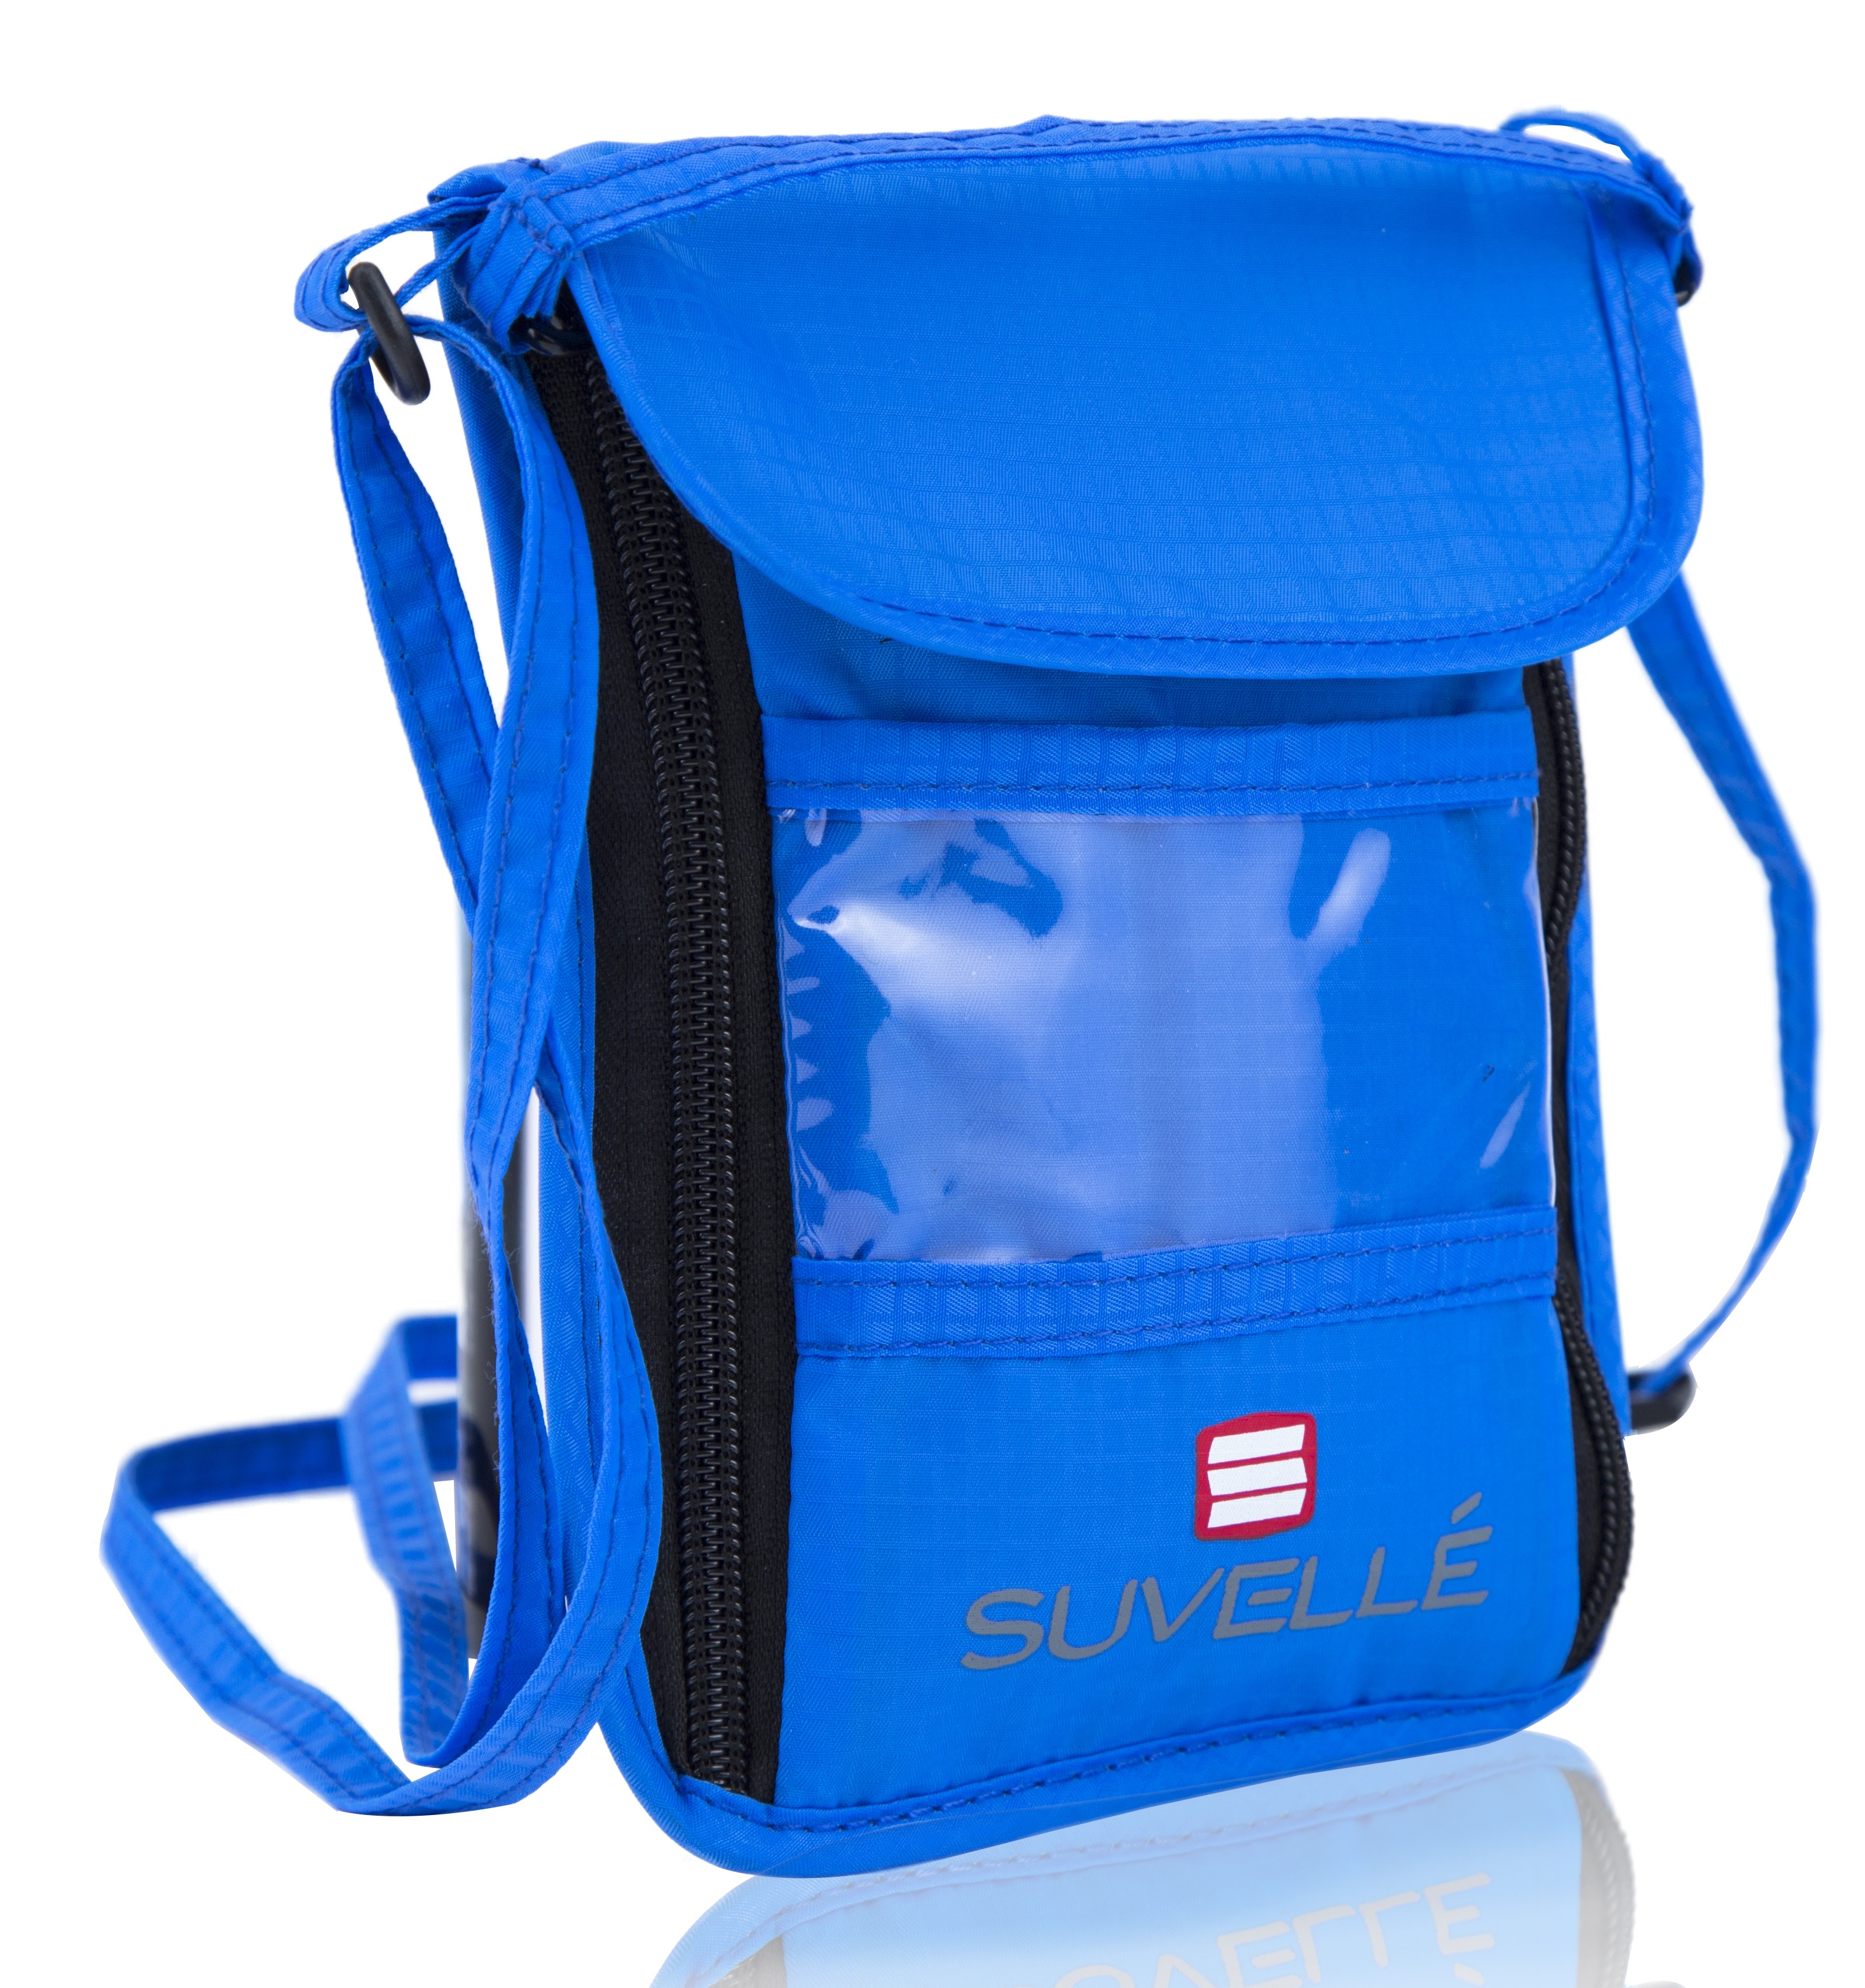 Suvelle RFID Blocking Travel Neck Stash Wallet Concealed Travel Pouch and Passport Holder - image 1 of 8